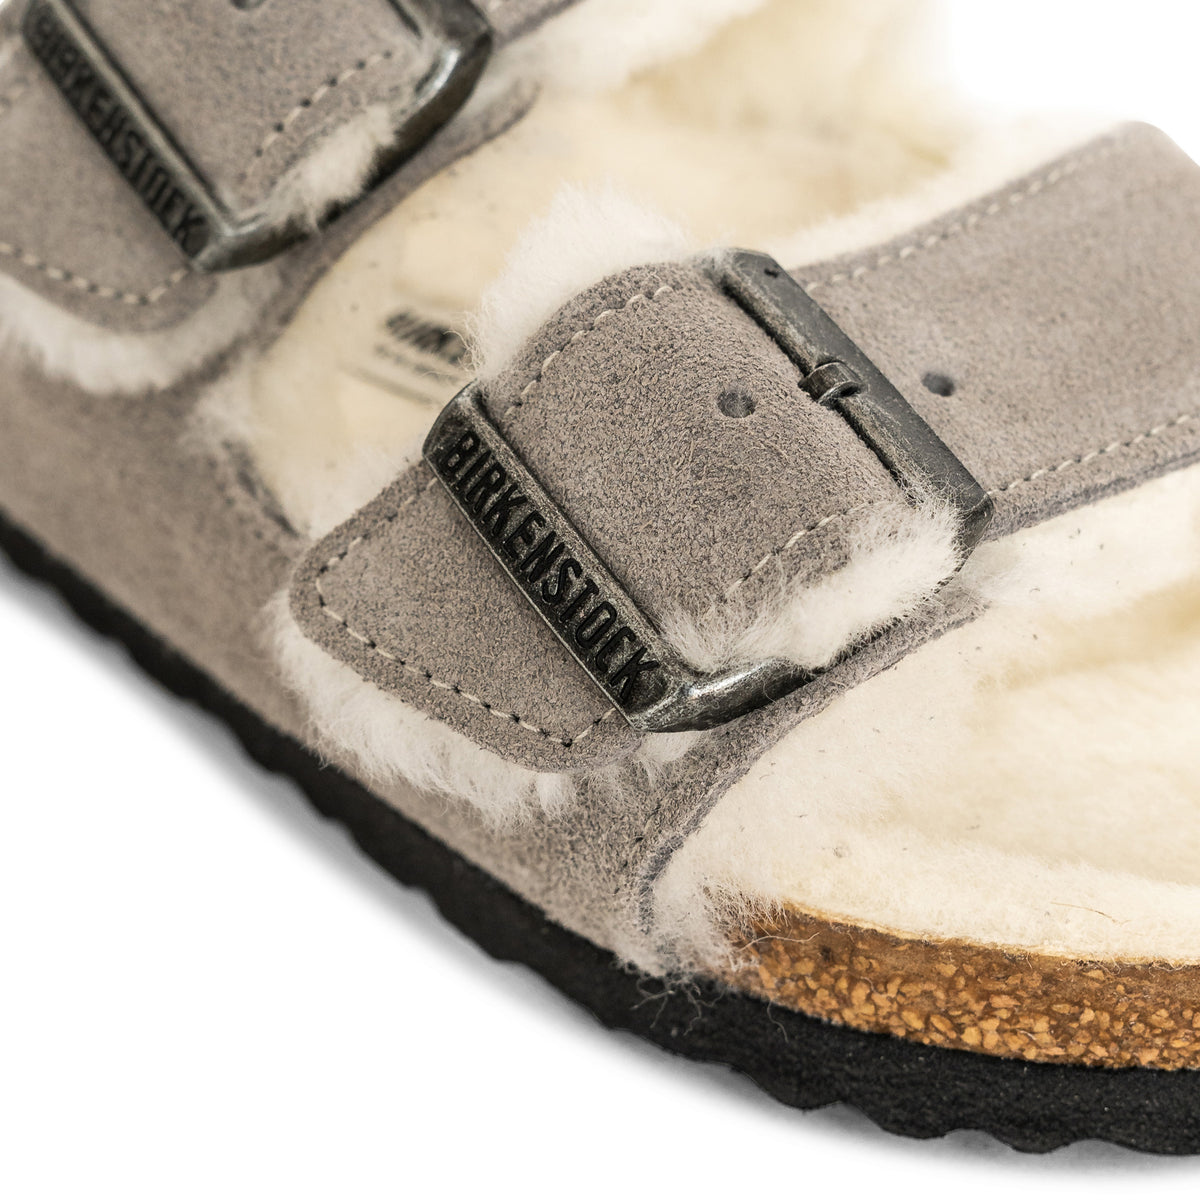 Load image into Gallery viewer, BIRKENSTOCK Stone Coin Arizona Shearling
